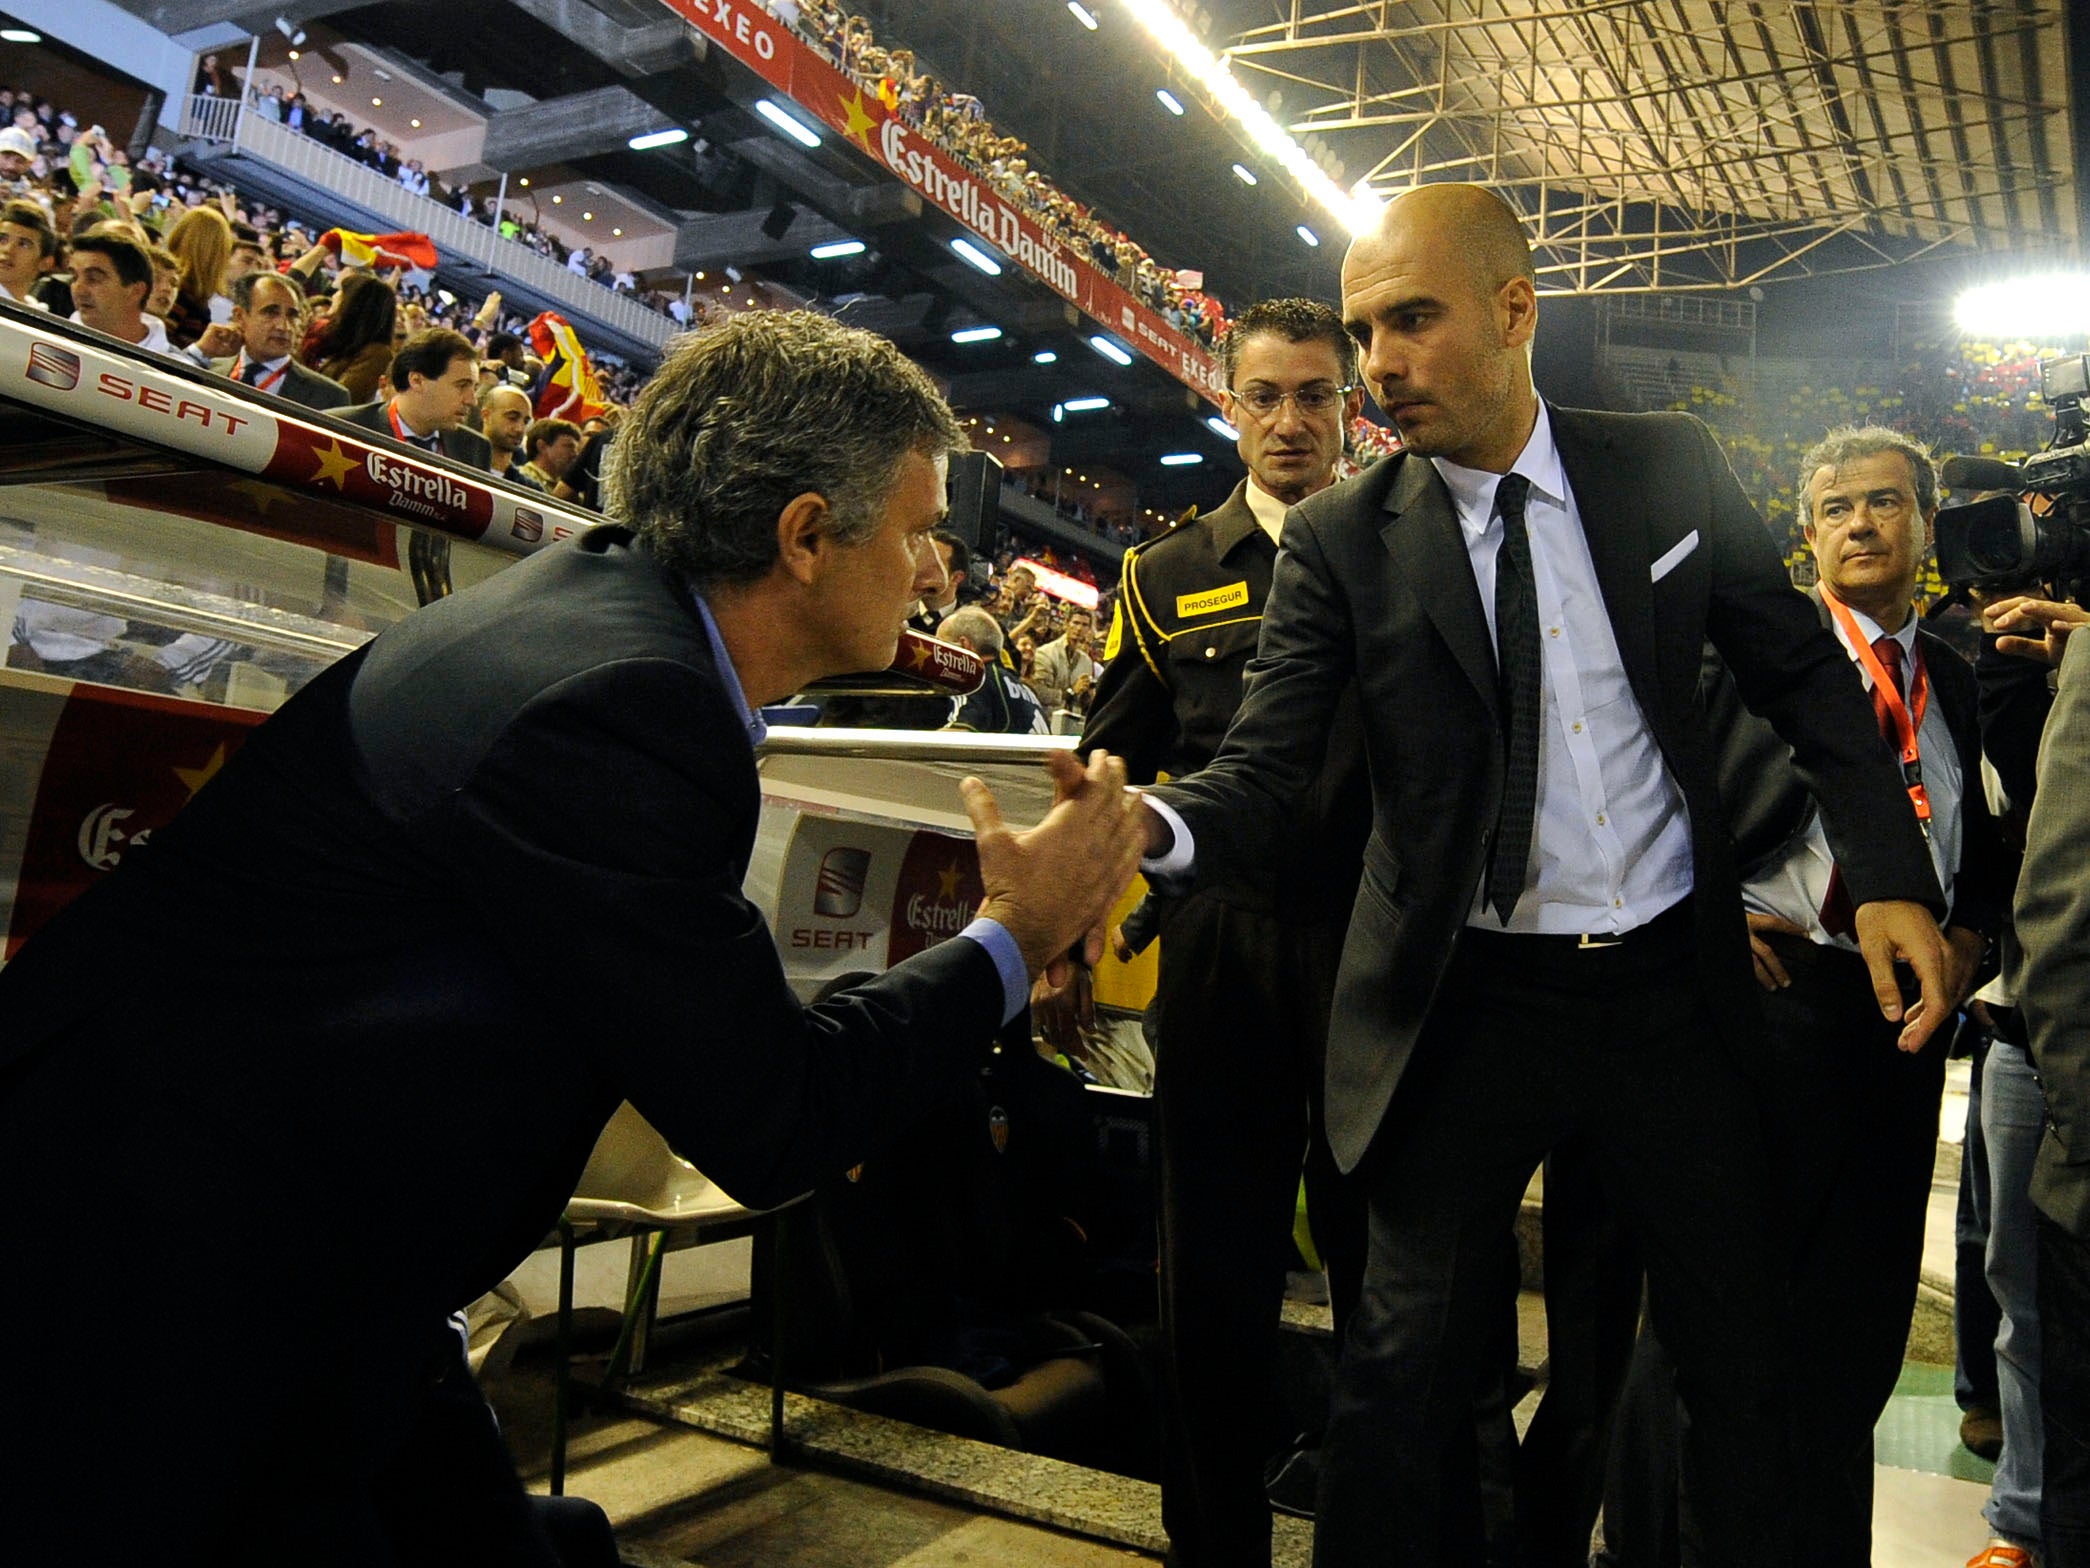 Jose Mourinho and Pep Guardiola during their spells at Real Madrid and Barcelona respectively